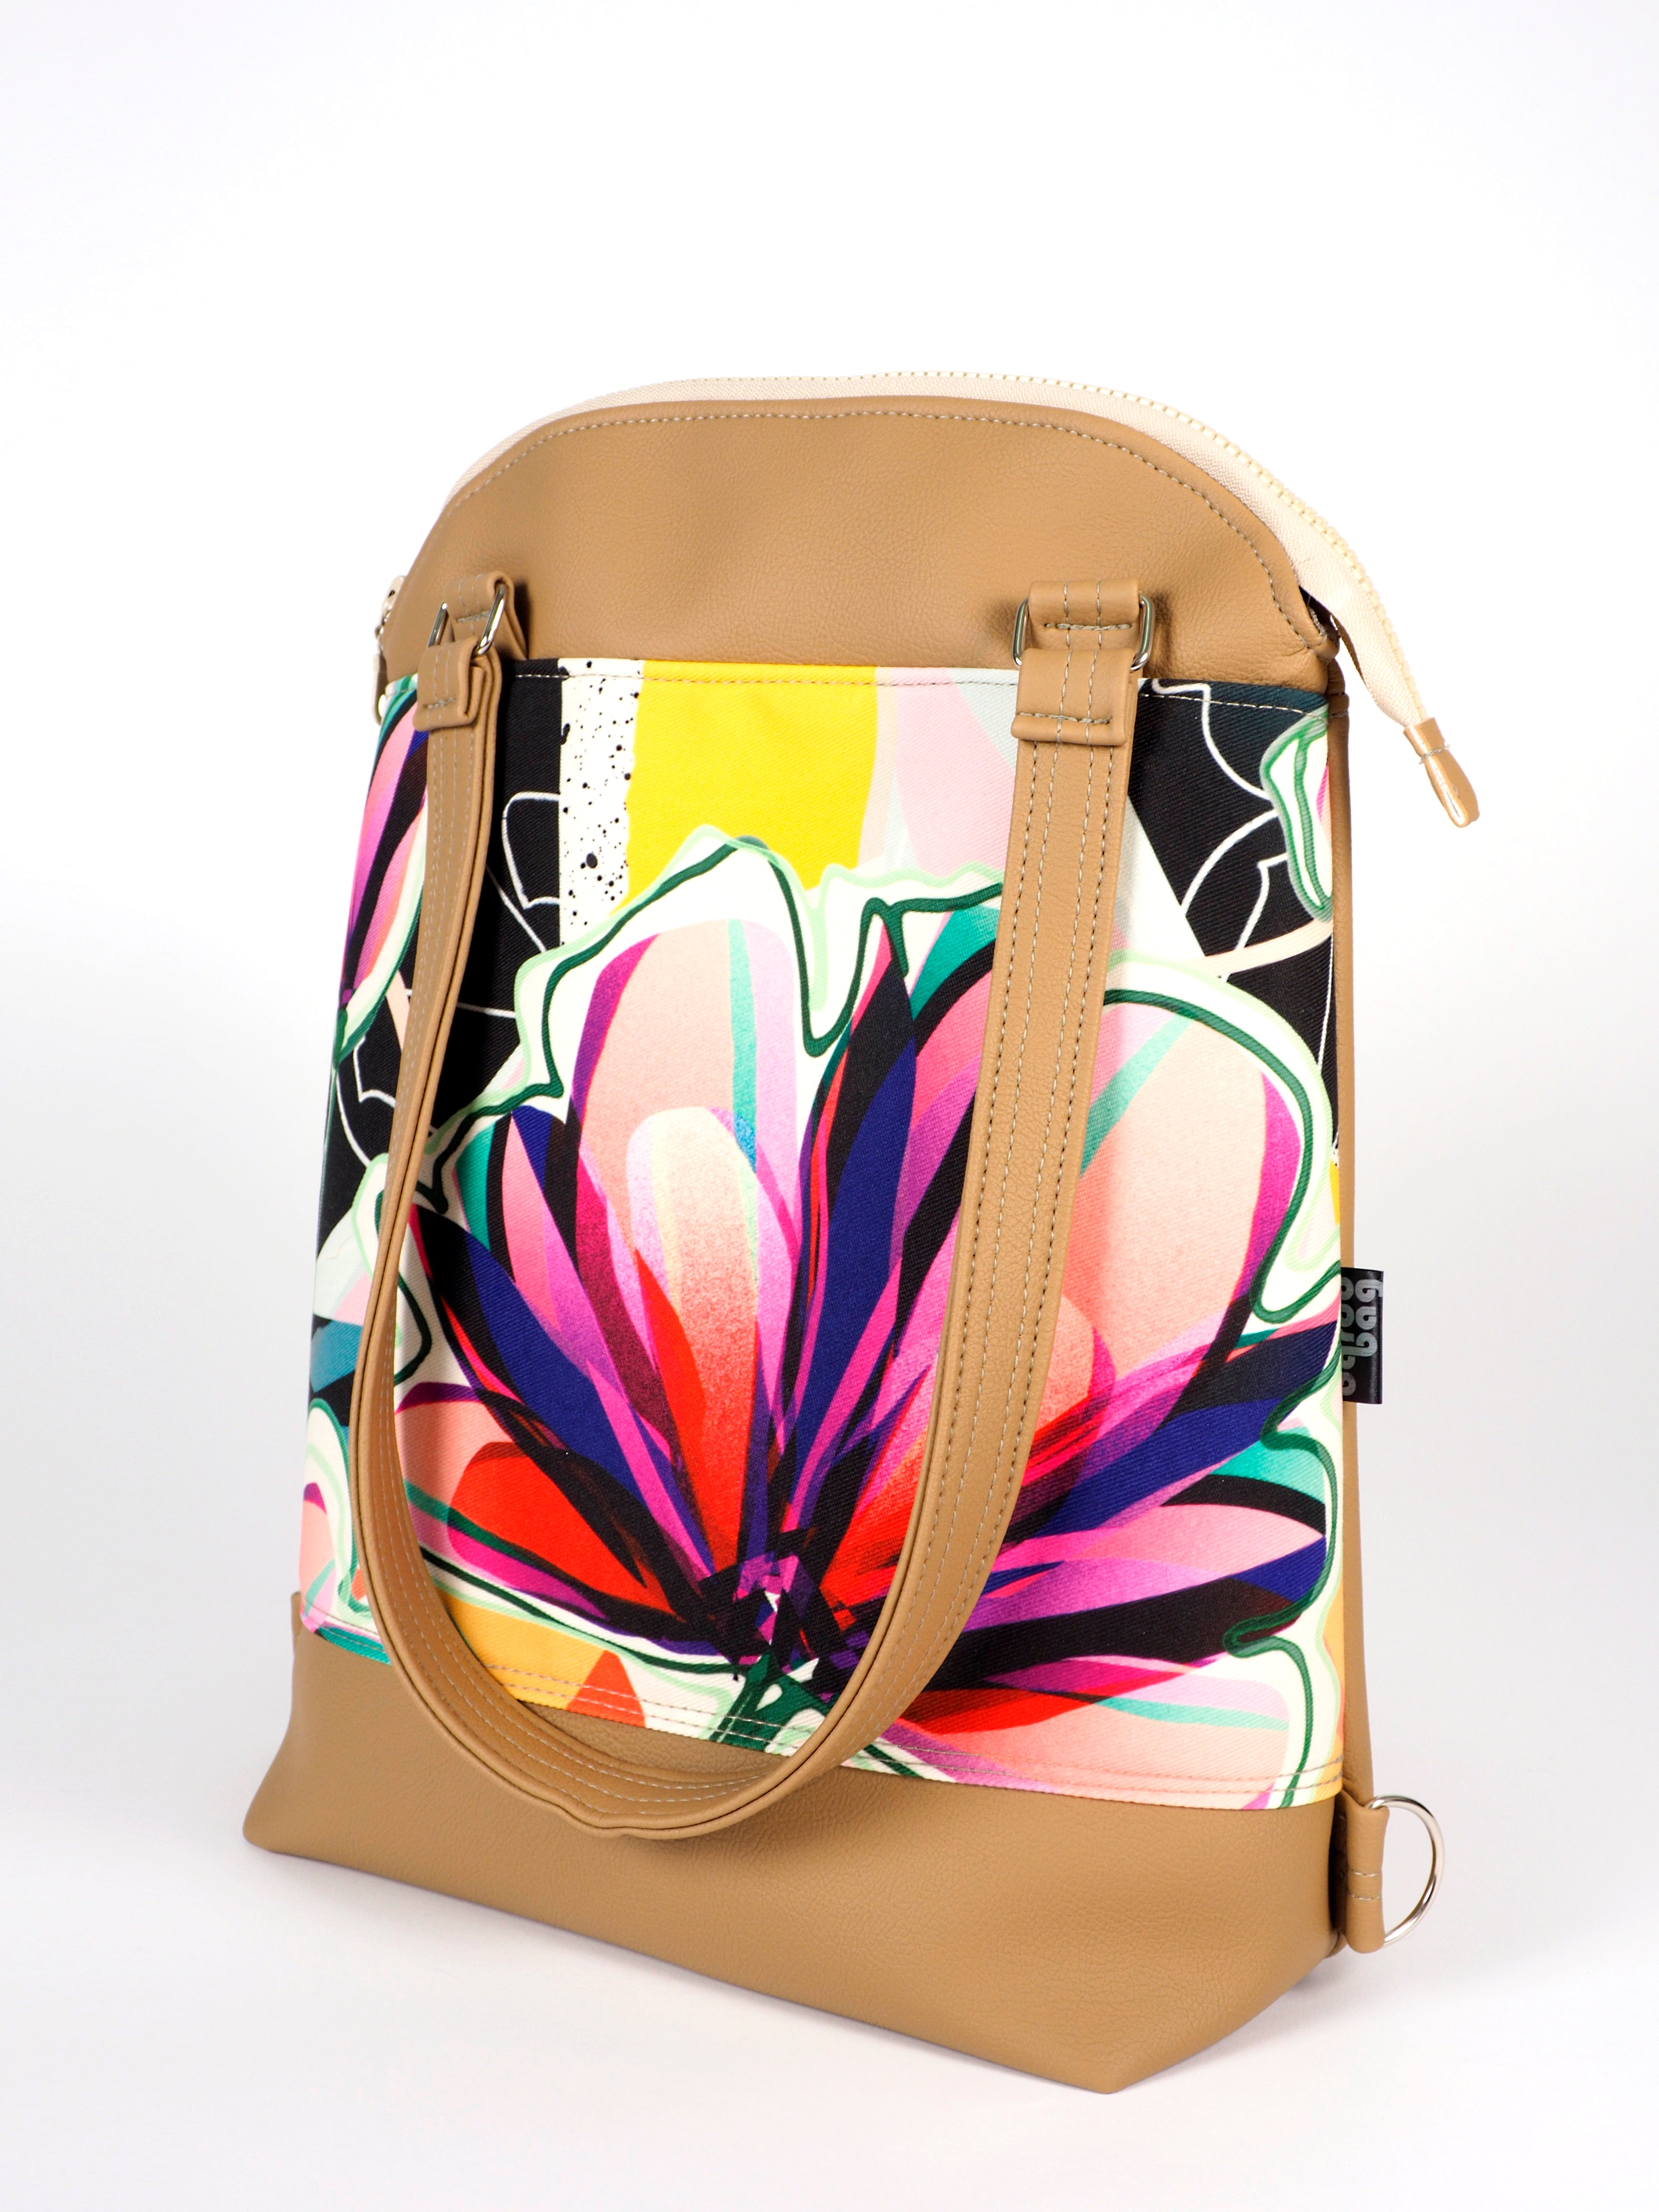 Bardo classic bag and backpack - Тenderness - Premium  from BARDO ART WORKS - Just lv89.00! Shop now at BARDO ART WORKS